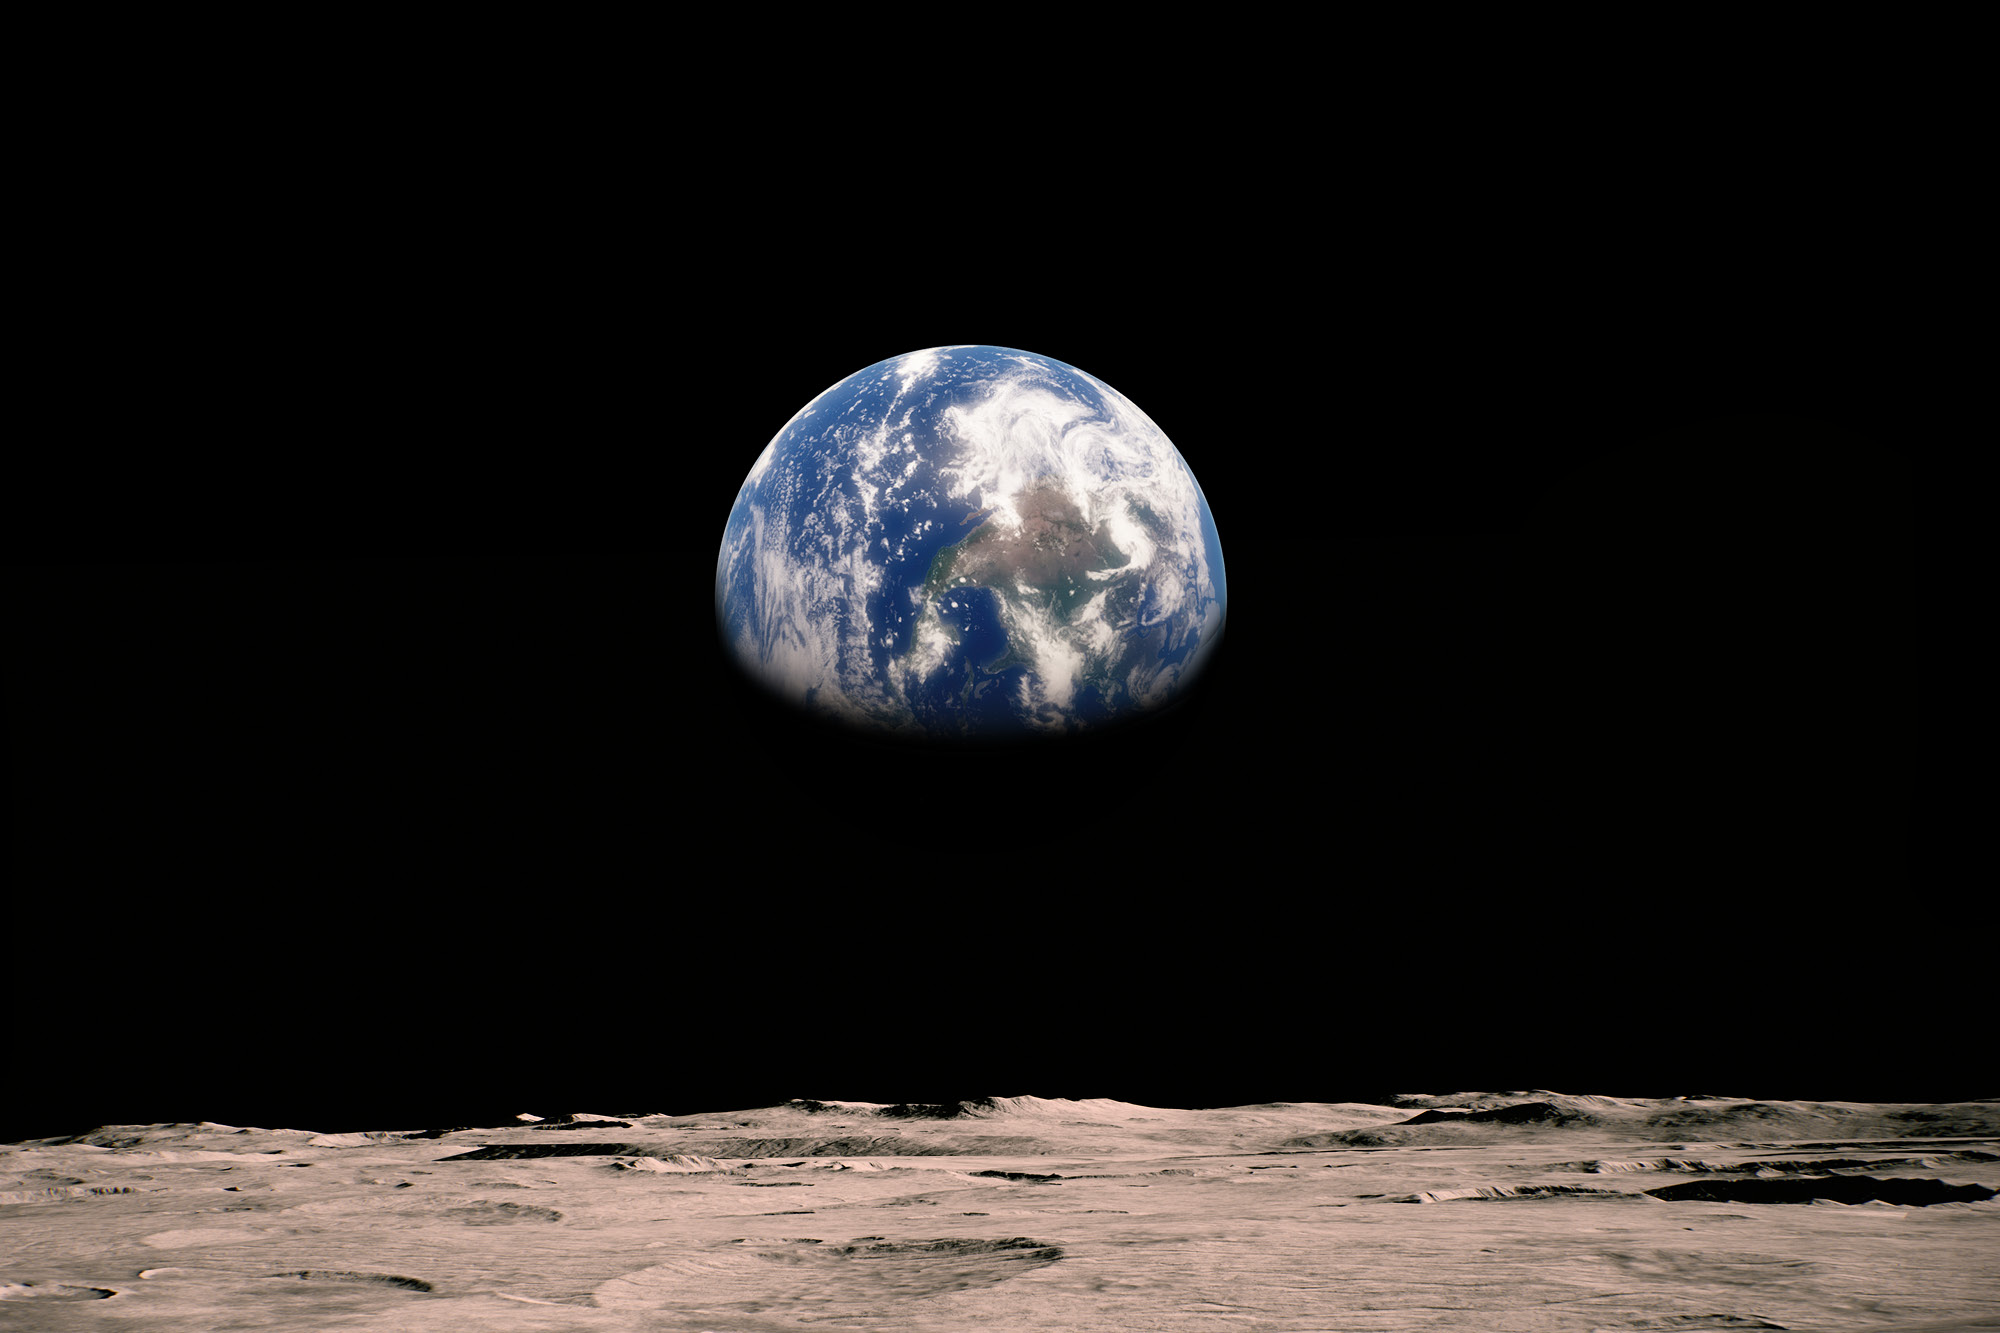 Photo of the earth taken from the moon.